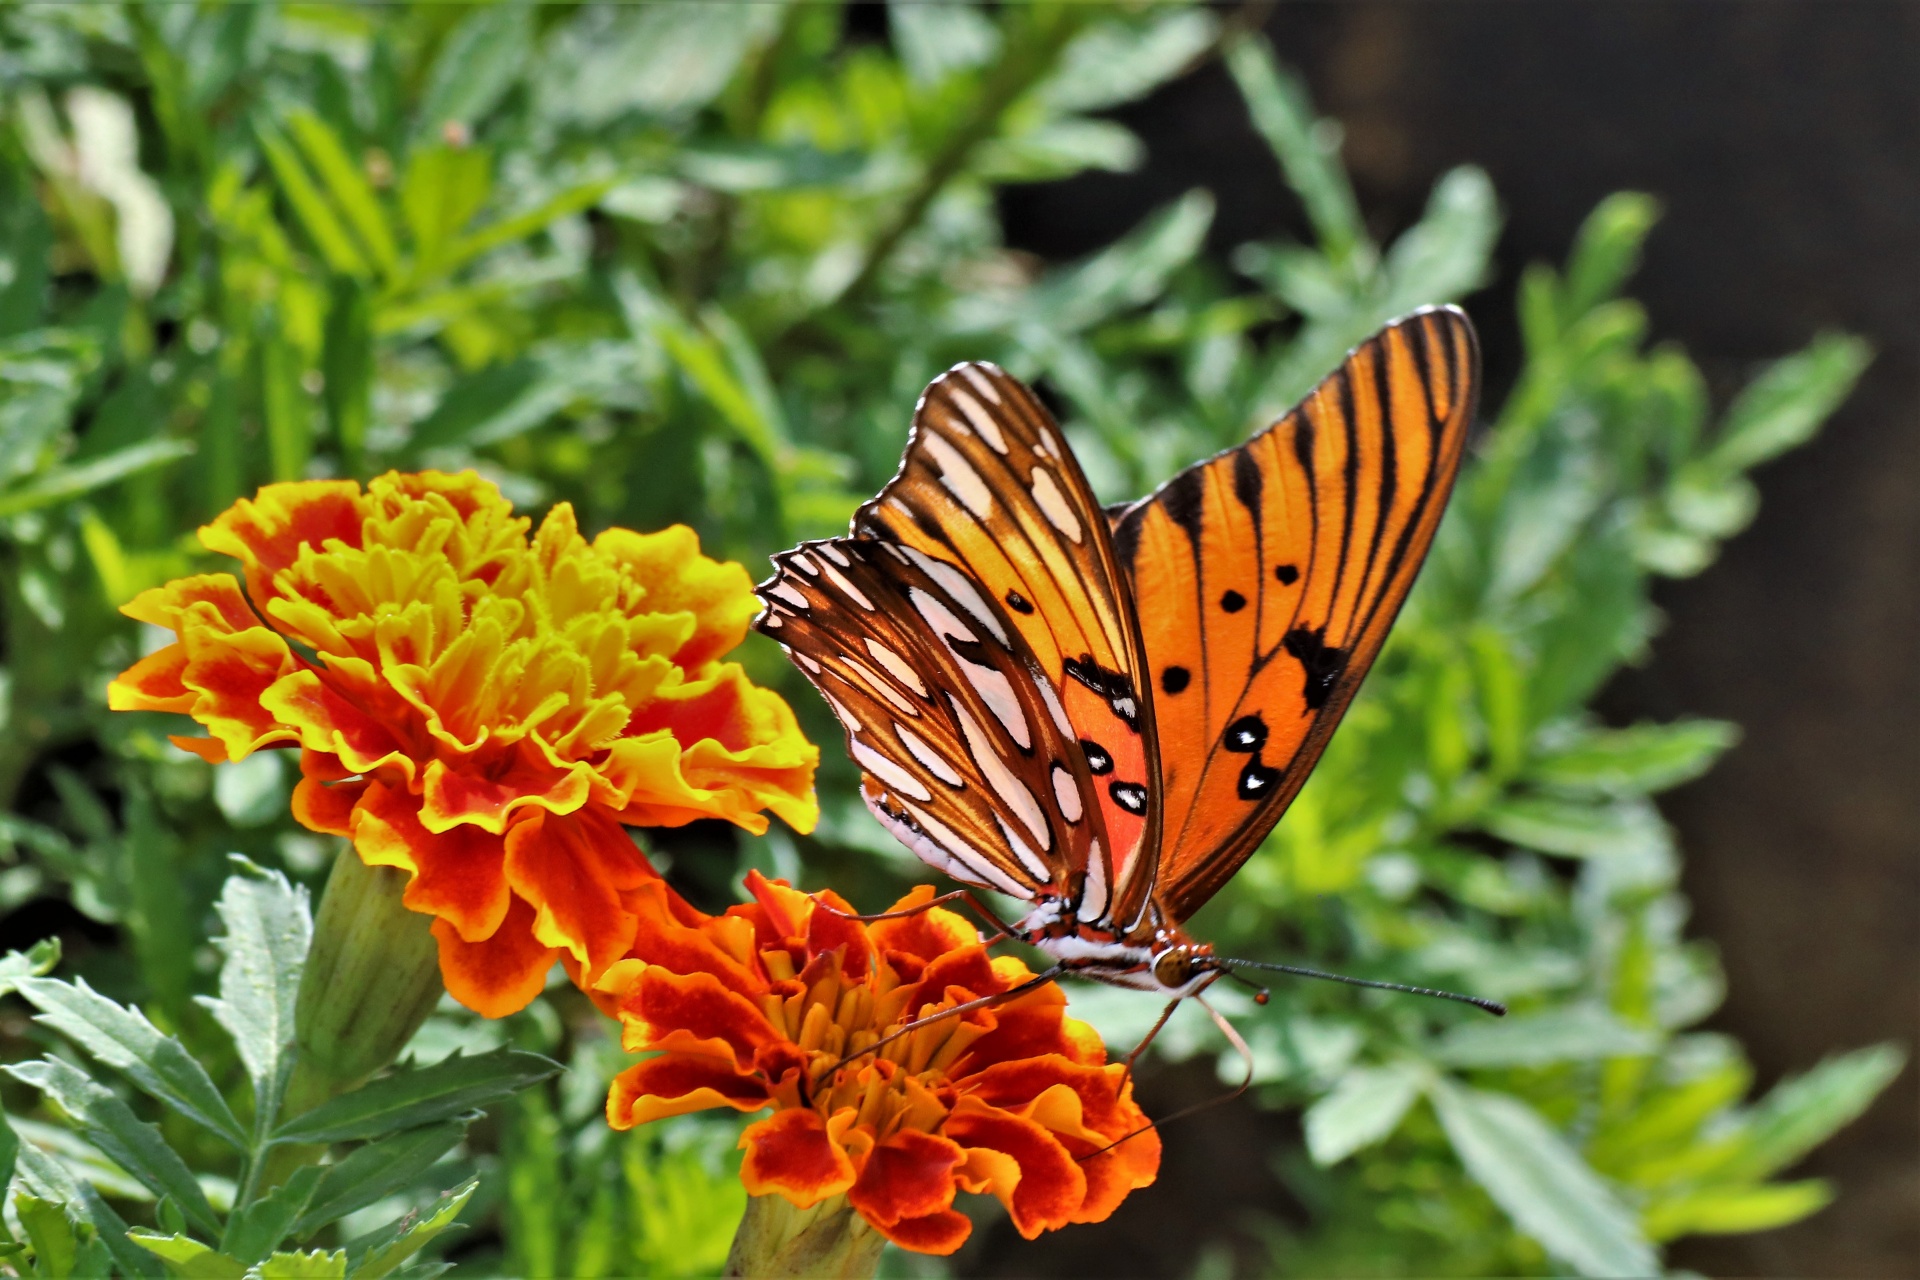 Close-up of a beautiful orange and black gulf fritillary butterfly, showing wings both ventral and dorsal, sipping nectar from an orange marigold flower.